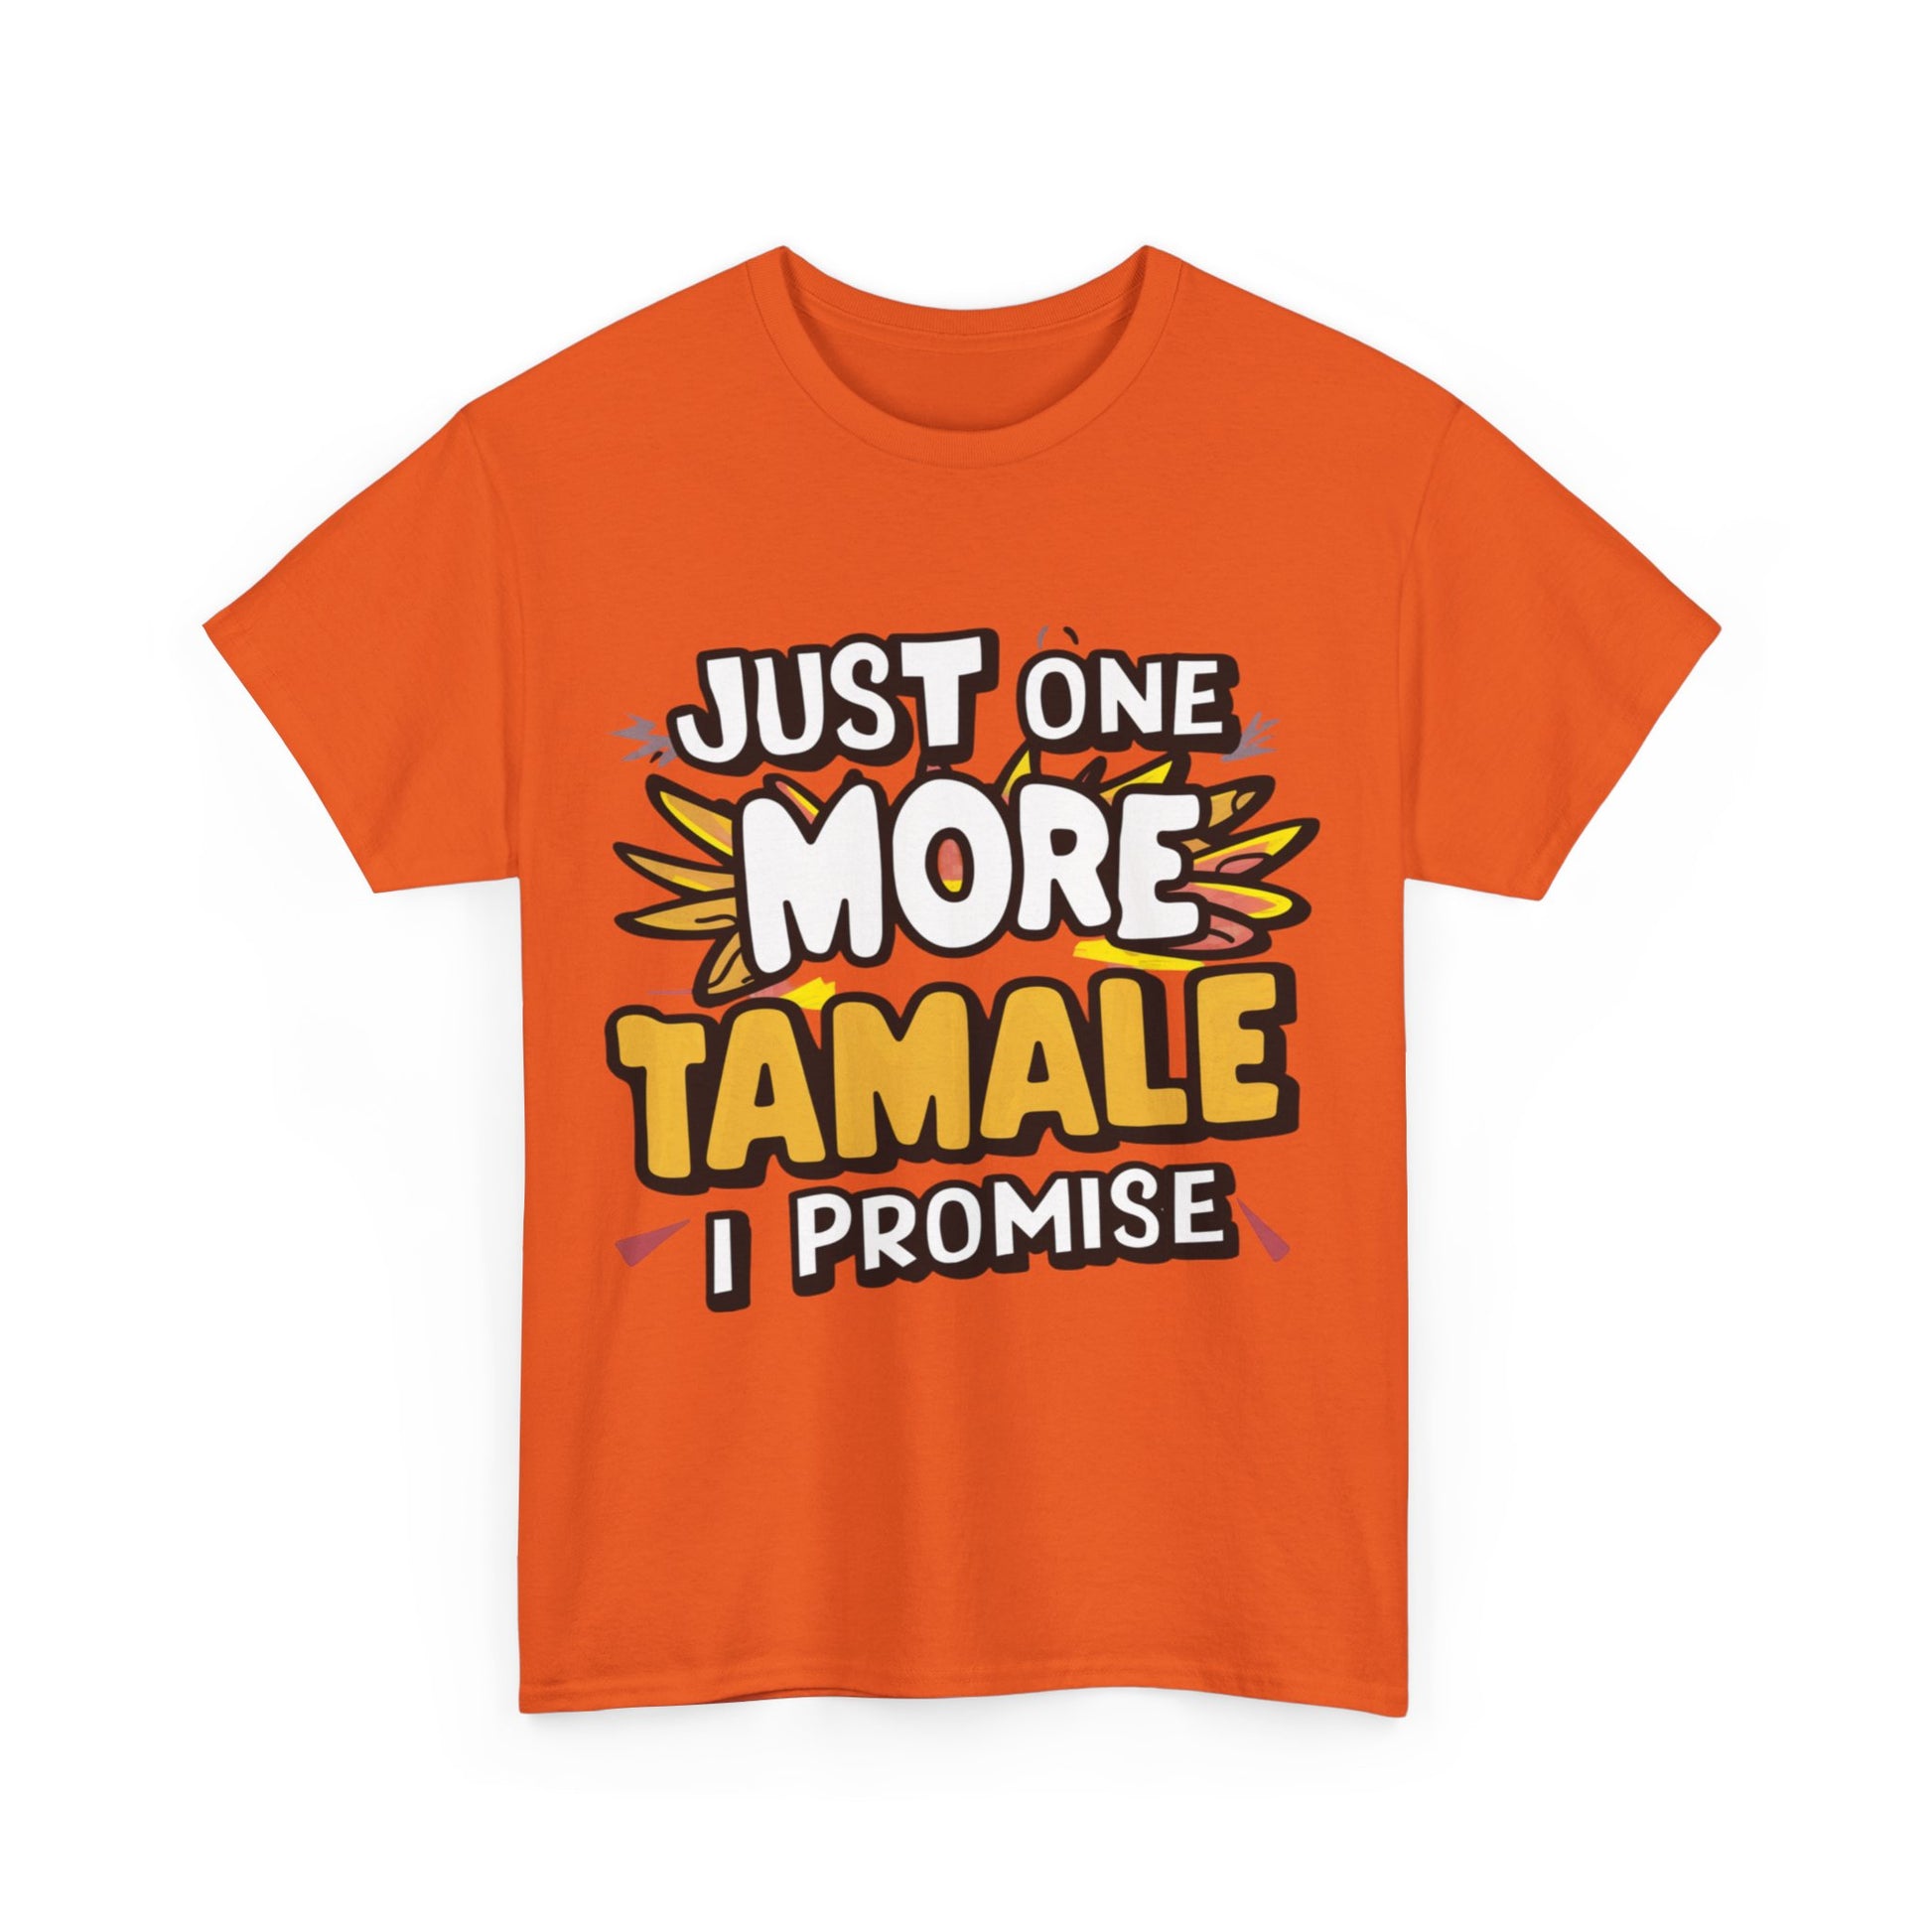 Just One More Tamale I Promise Mexican Food Graphic Unisex Heavy Cotton Tee Cotton Funny Humorous Graphic Soft Premium Unisex Men Women Orange T-shirt Birthday Gift-30